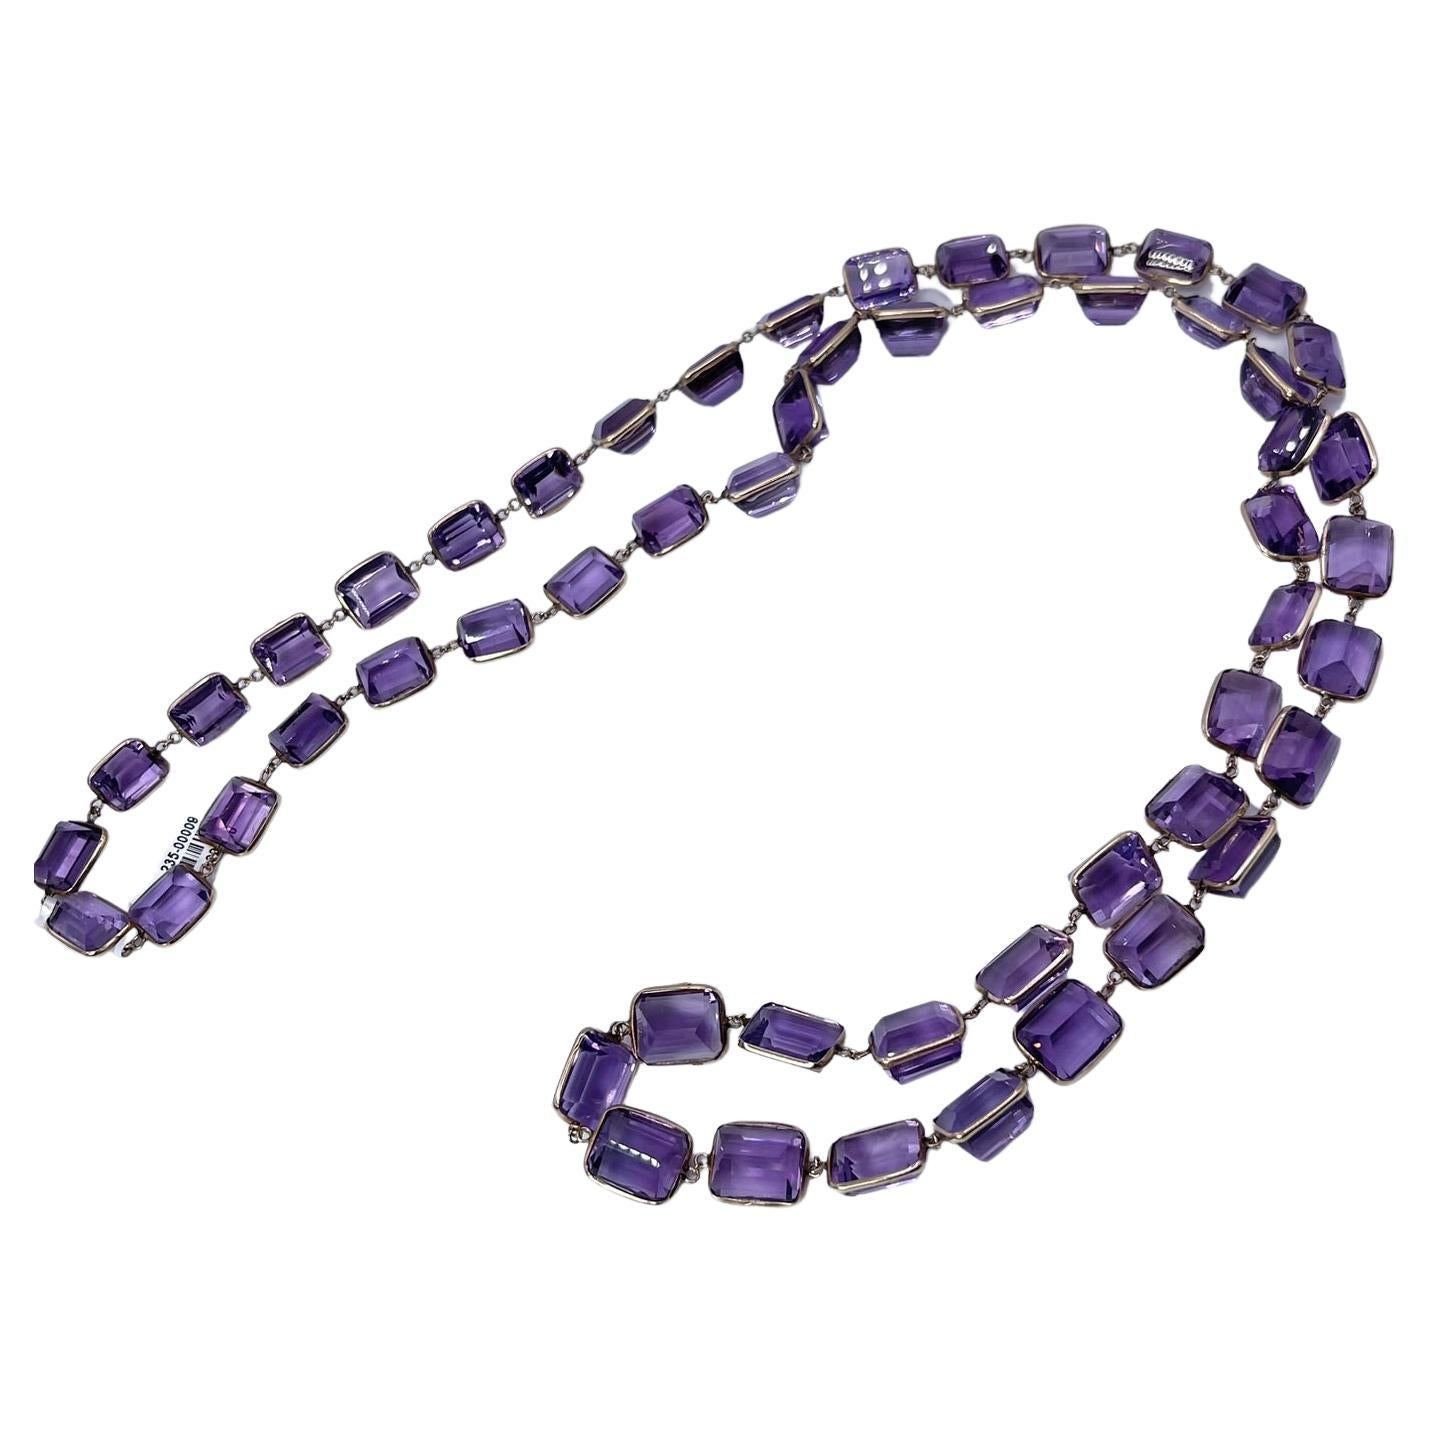 Amethyst Necklace Long Natural Amethyst Yard Necklace Link Necklace 300 Carats  For Sale